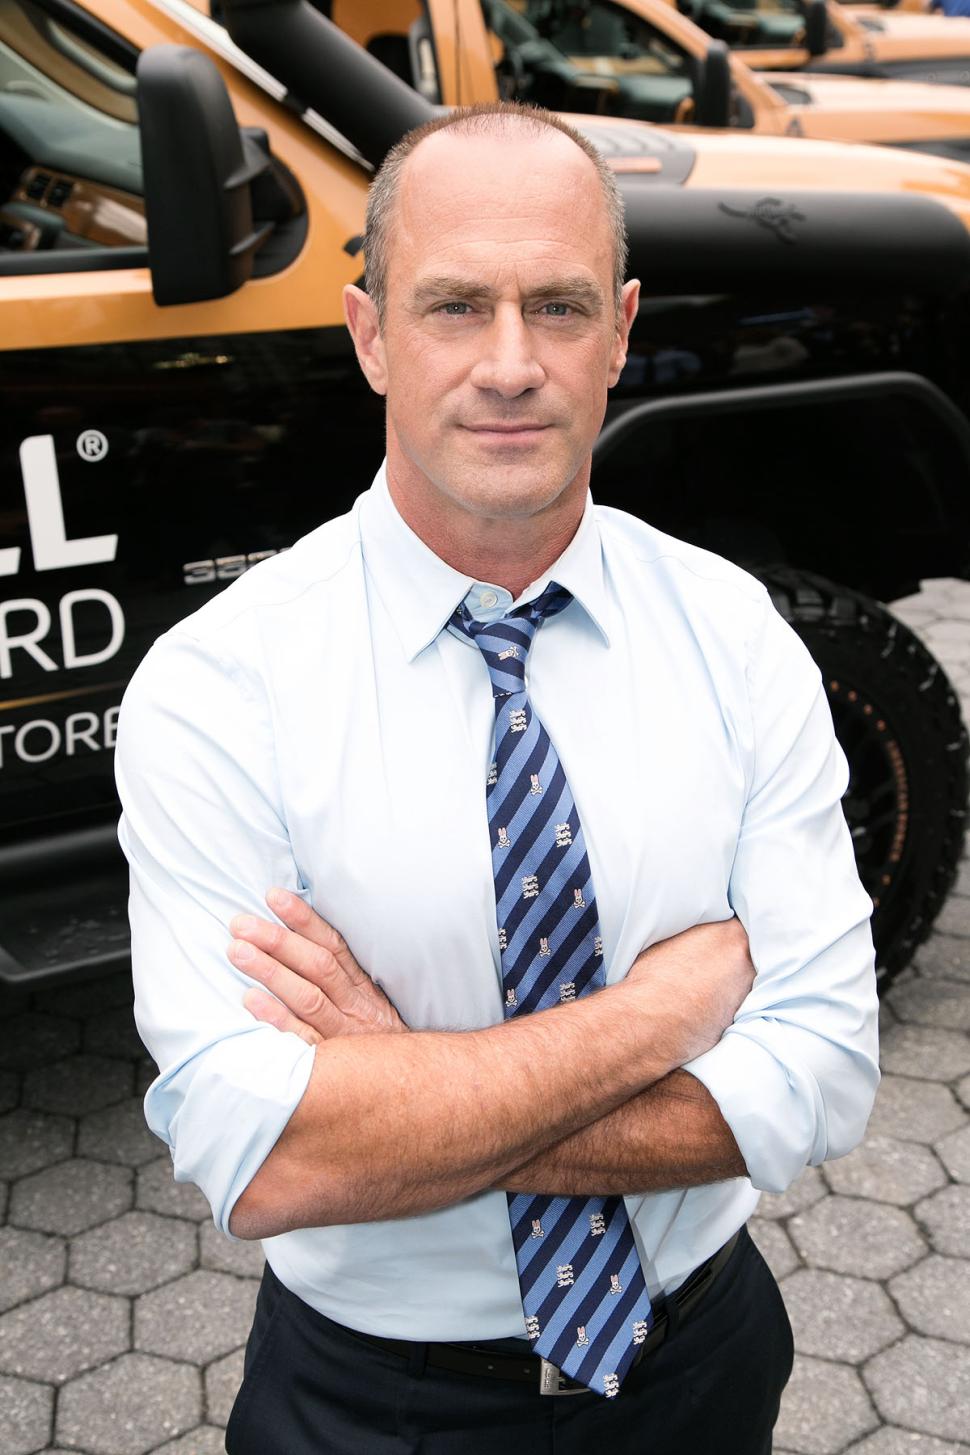 Christopher Meloni’s ‘L&O’ shoots have put him atop the Empire State Building as well as hanging from building ledges.